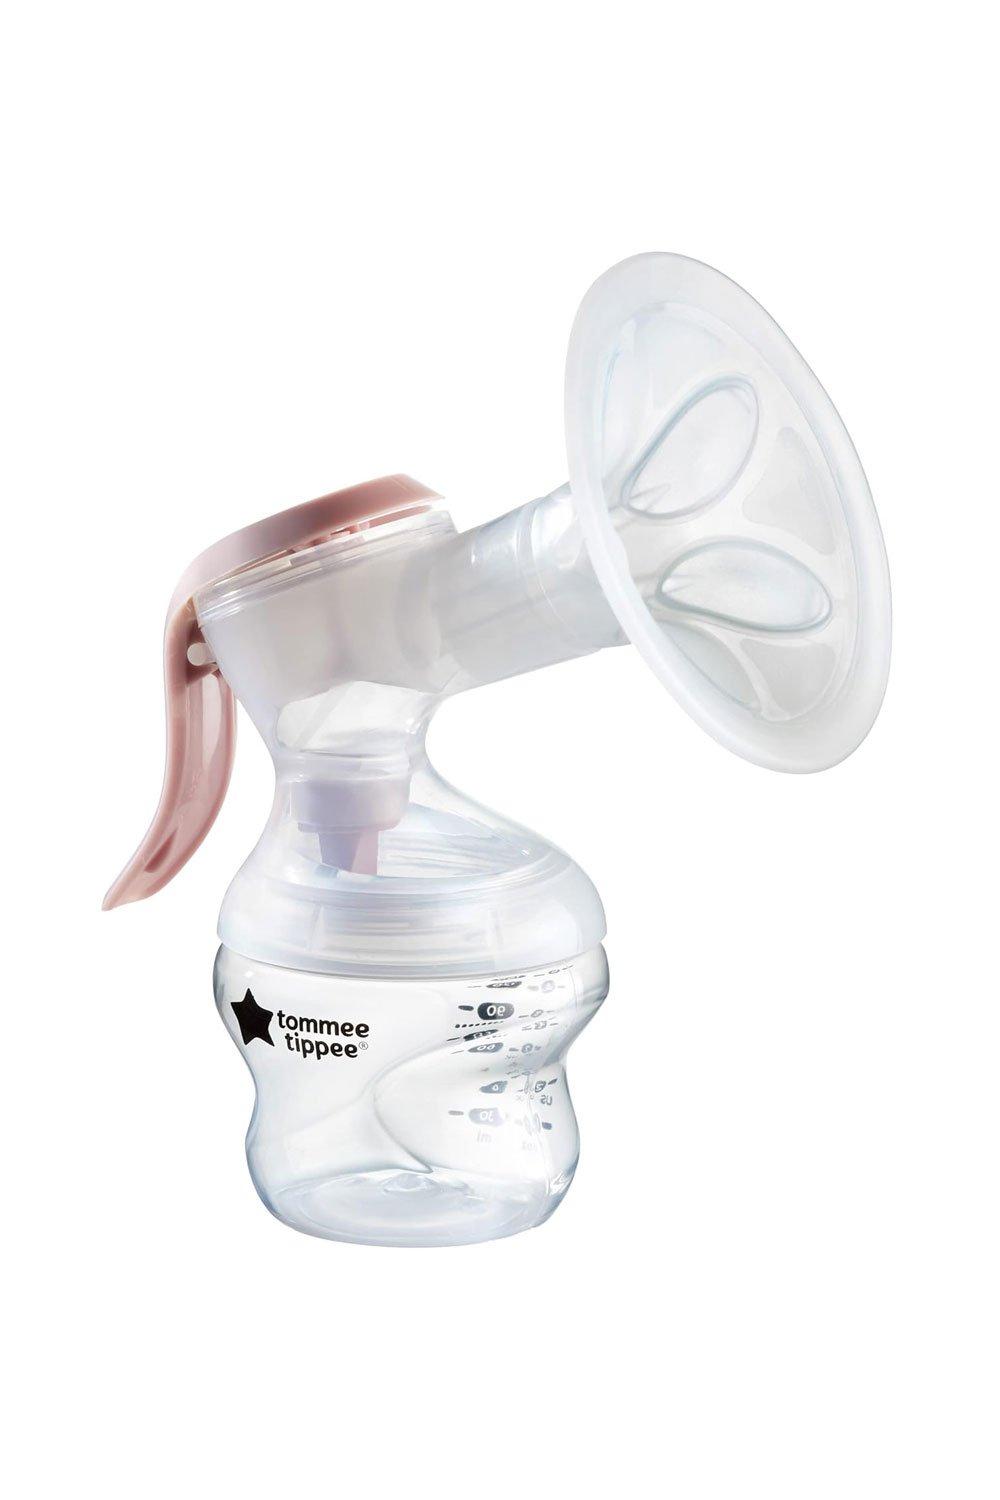 Nursing & Feeding | Made for Me™ Single Manual Breat Pump | Tommee Tippee